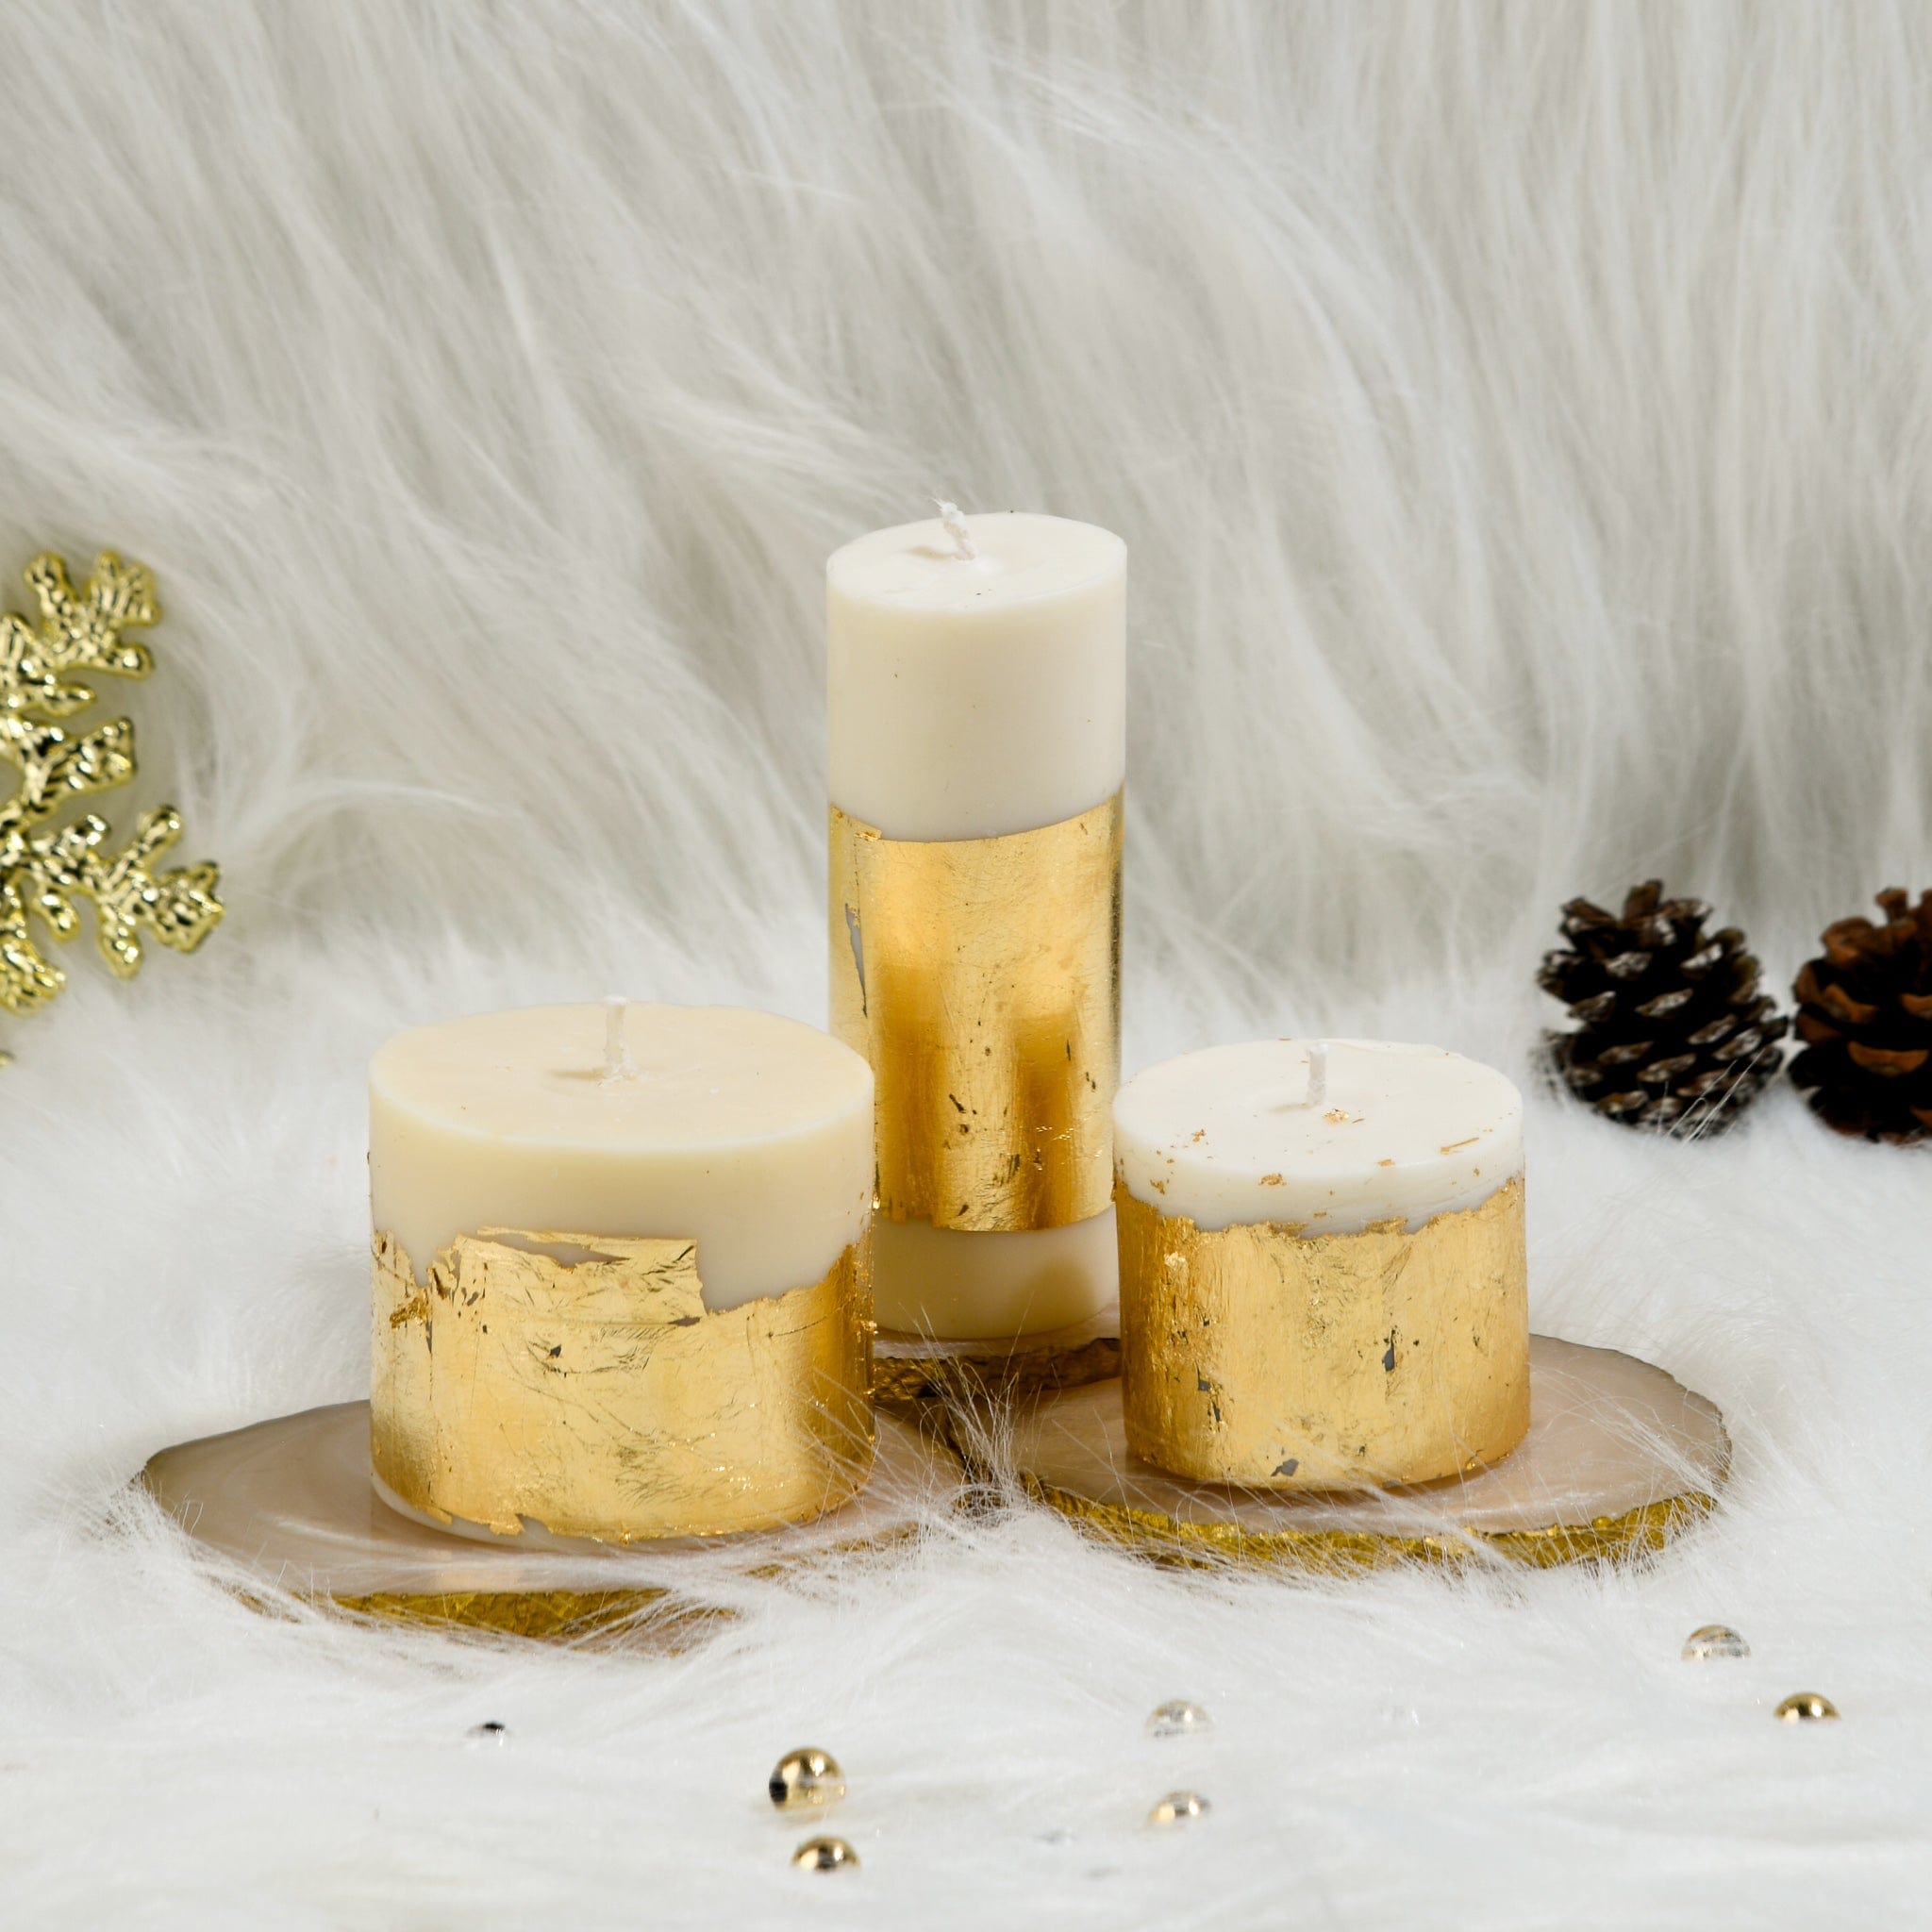 Joy - Set of 3 White Gold Pillar Candles - Cinnamon Roll Scented